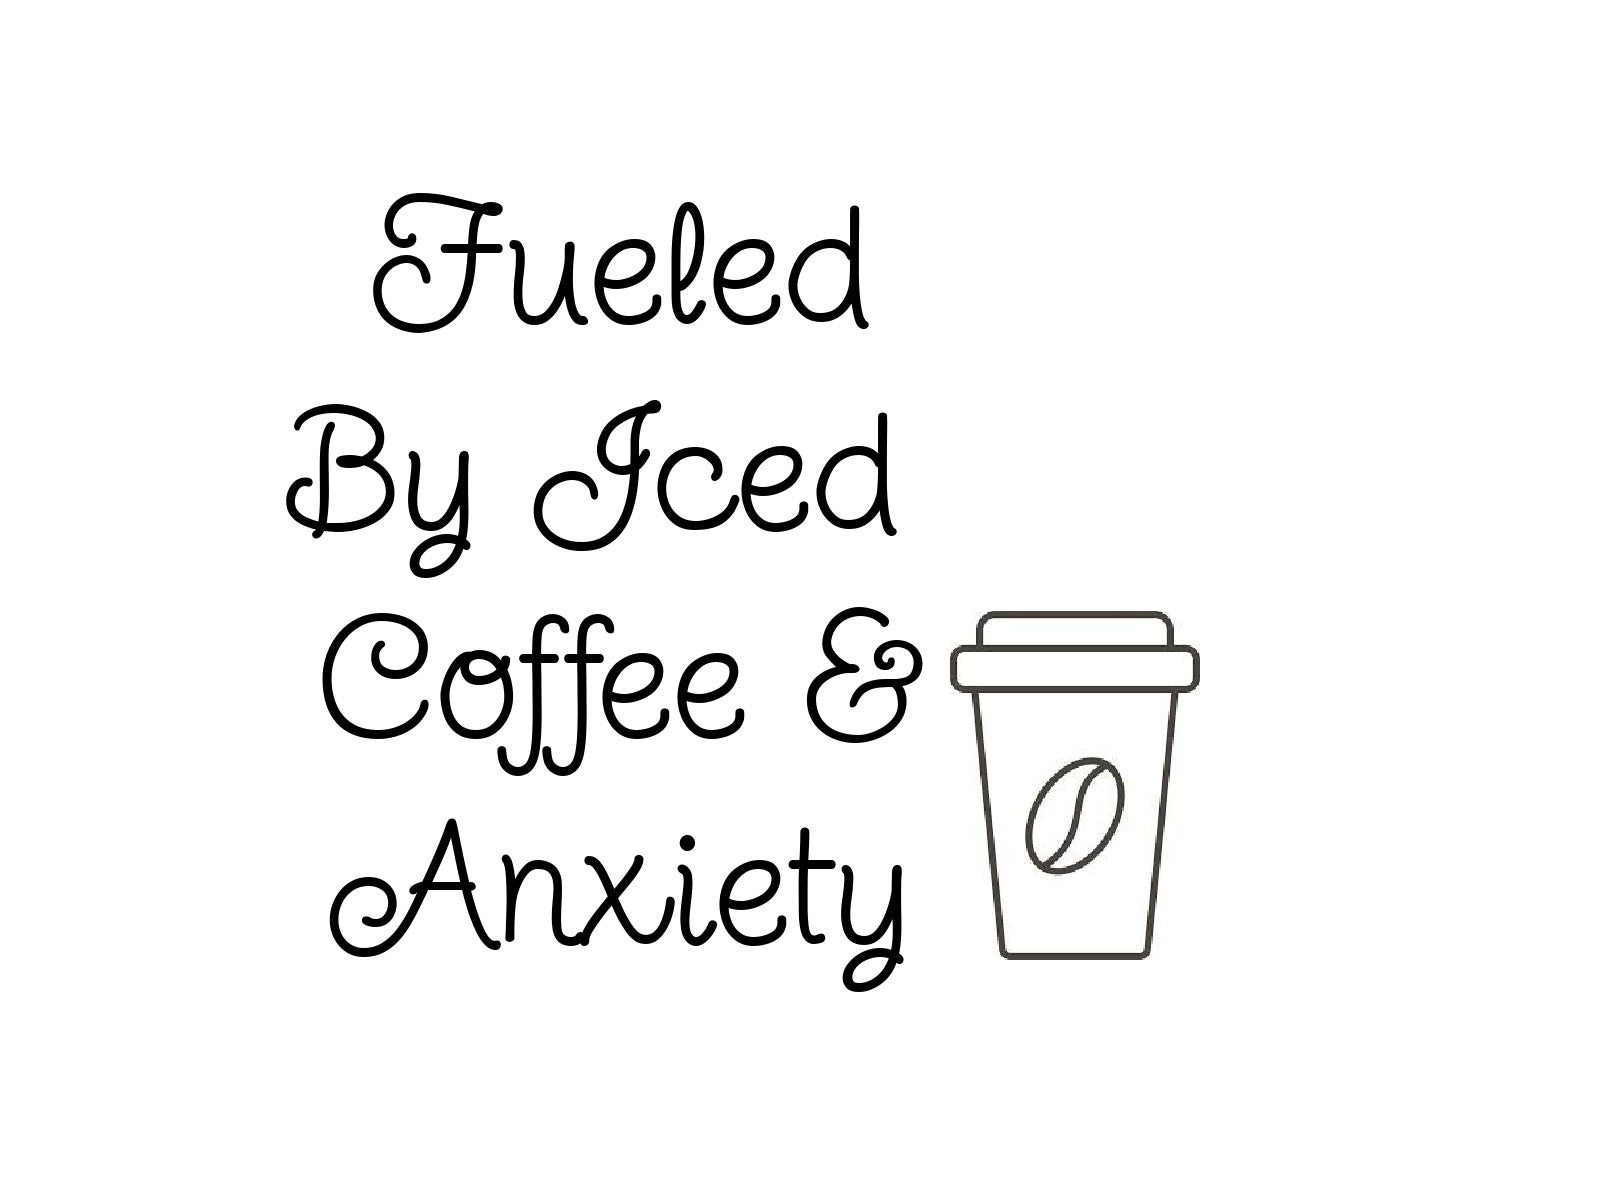 Fueled By Ice Coffee & Anxiety